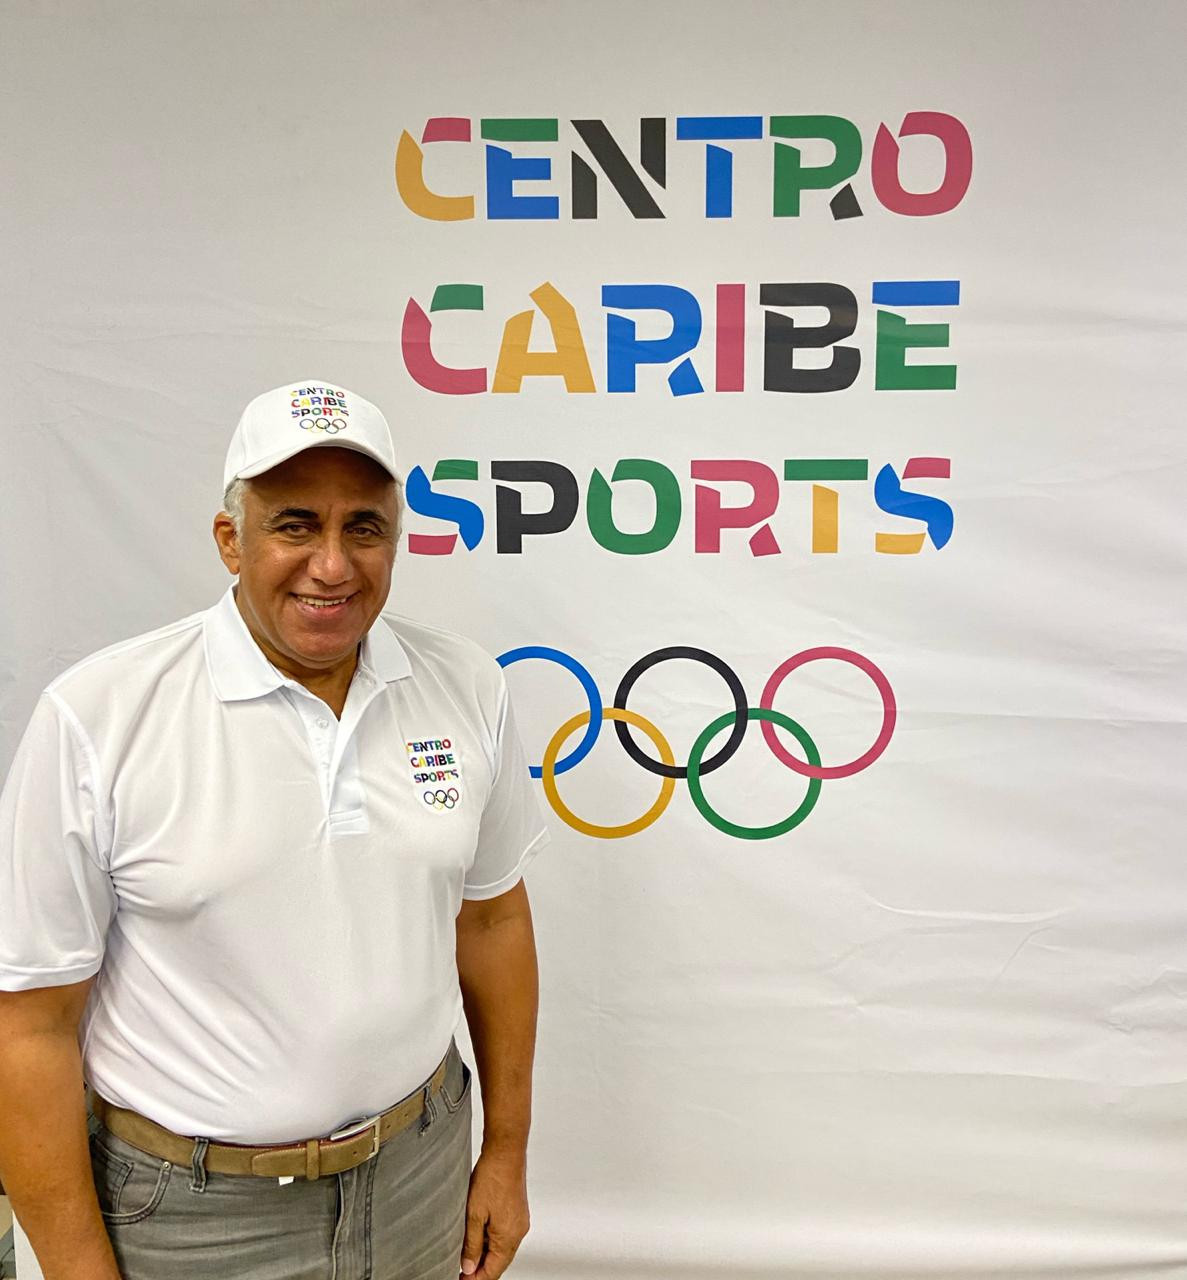 Luis Mejia made the announcement of the two bidding cities ©Centro Caribe Sports